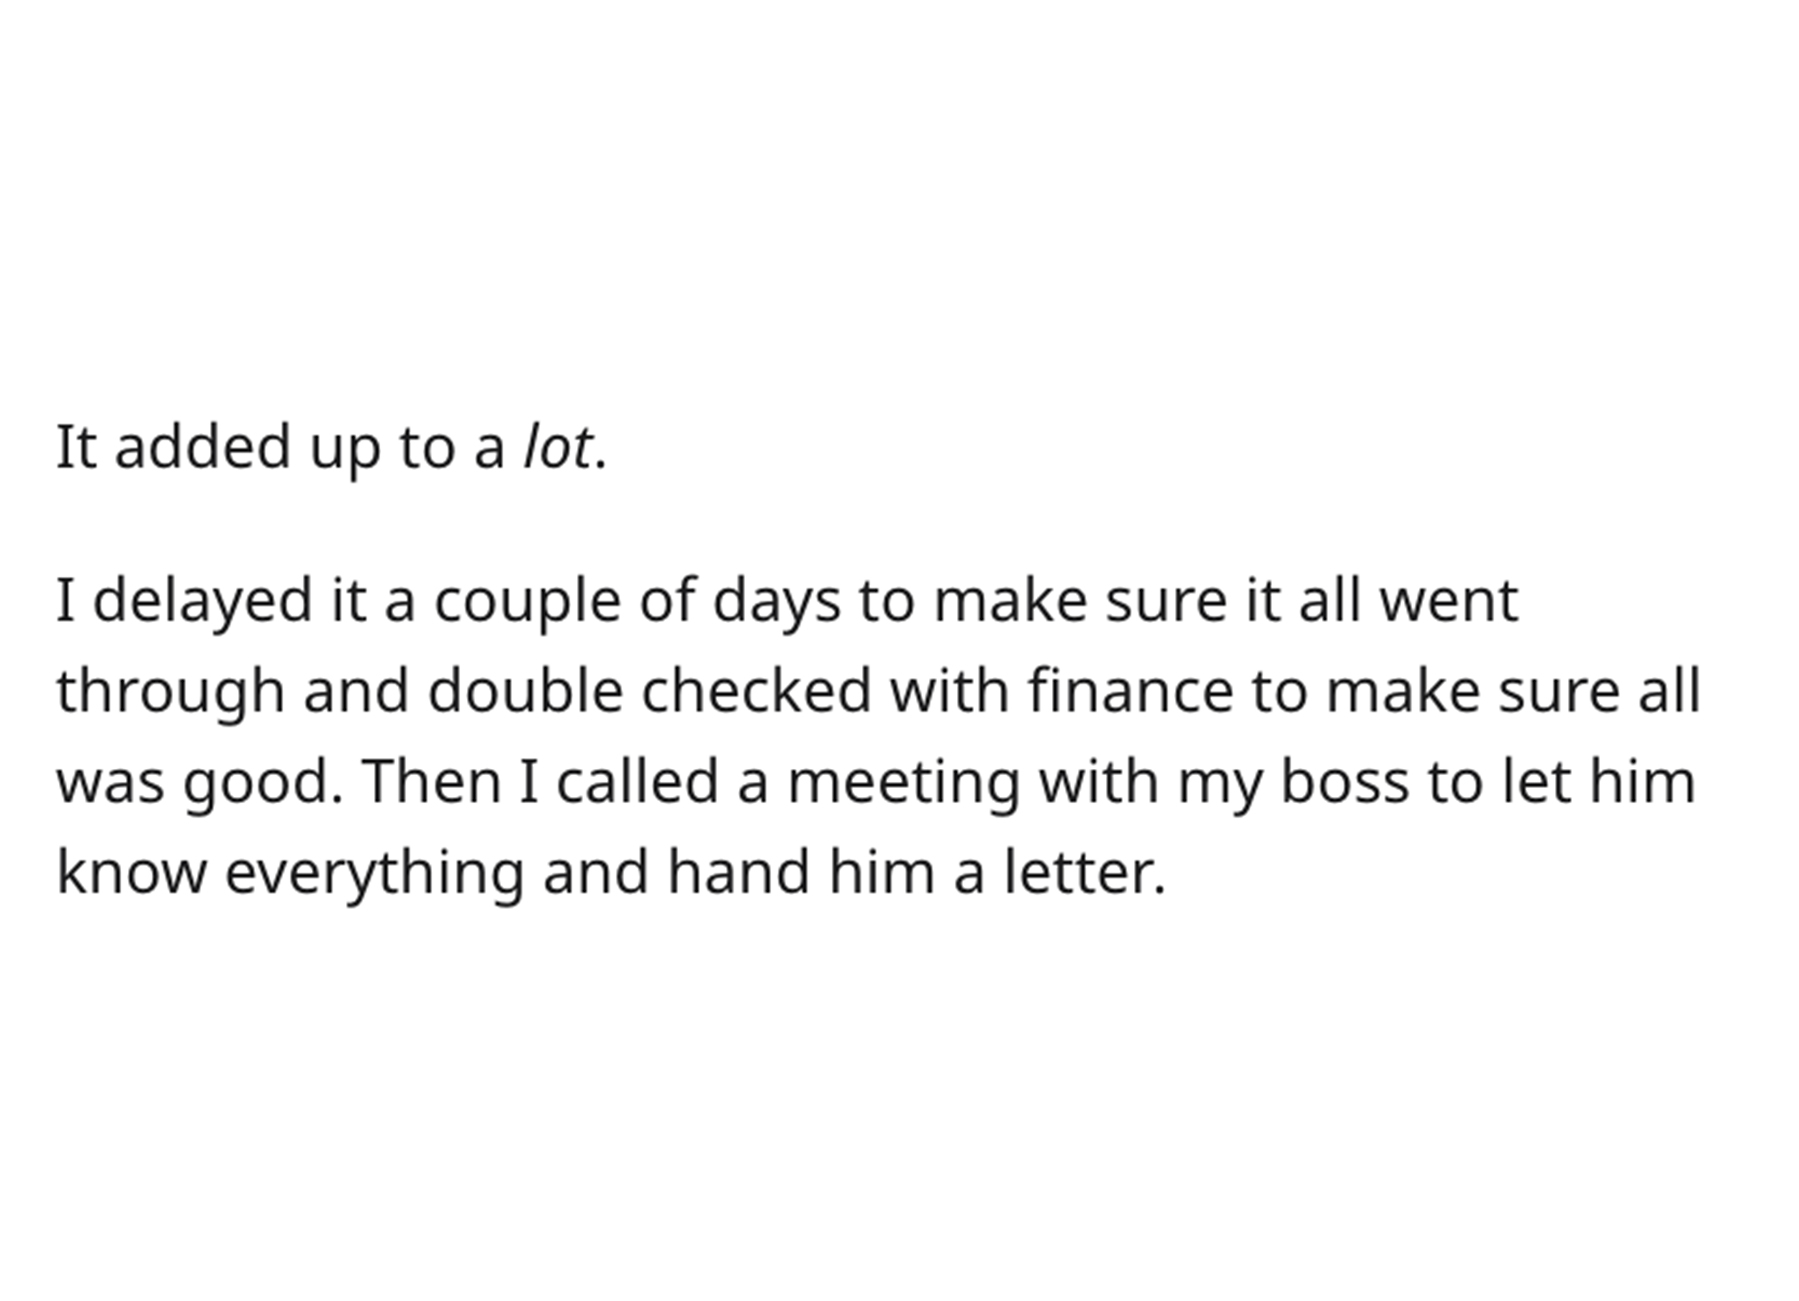 Supervisor Sticks it to Cheap Boss - angle - It added up to a lot. I delayed it a couple of days to make sure it all went through and double checked with finance to make sure all was good. Then I called a meeting with my boss to let him know everything an